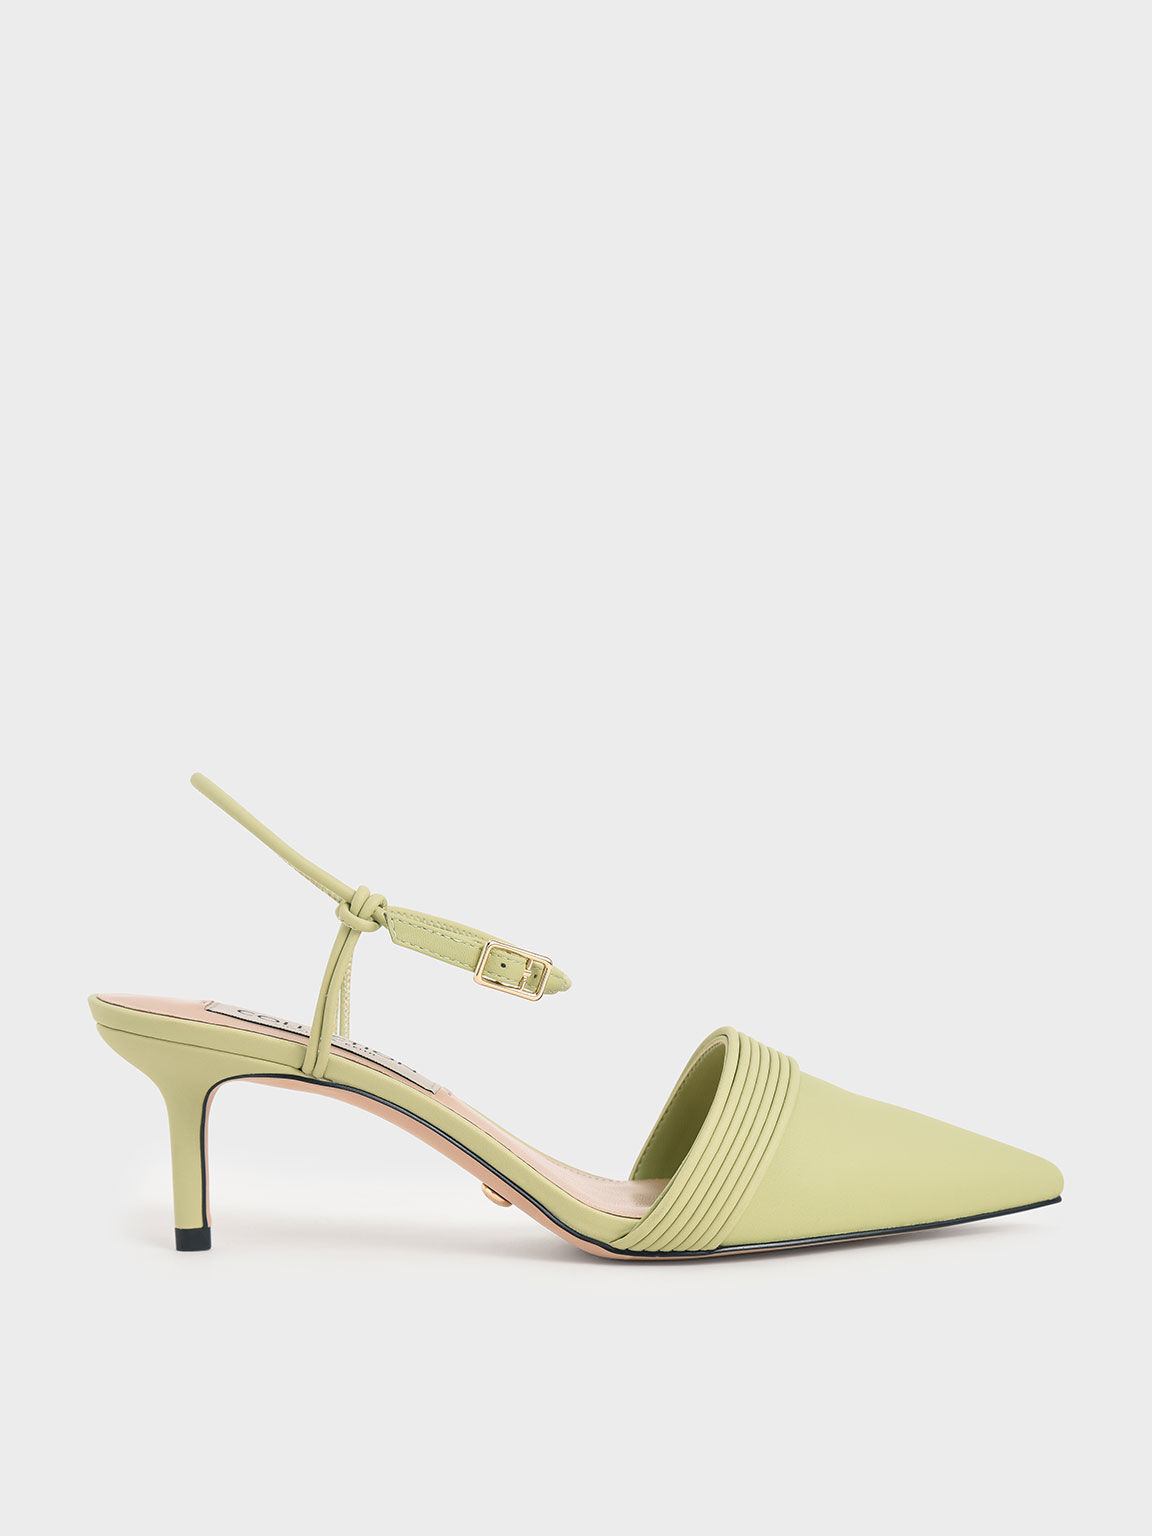 Leather Rope Detail Pumps, Green, hi-res